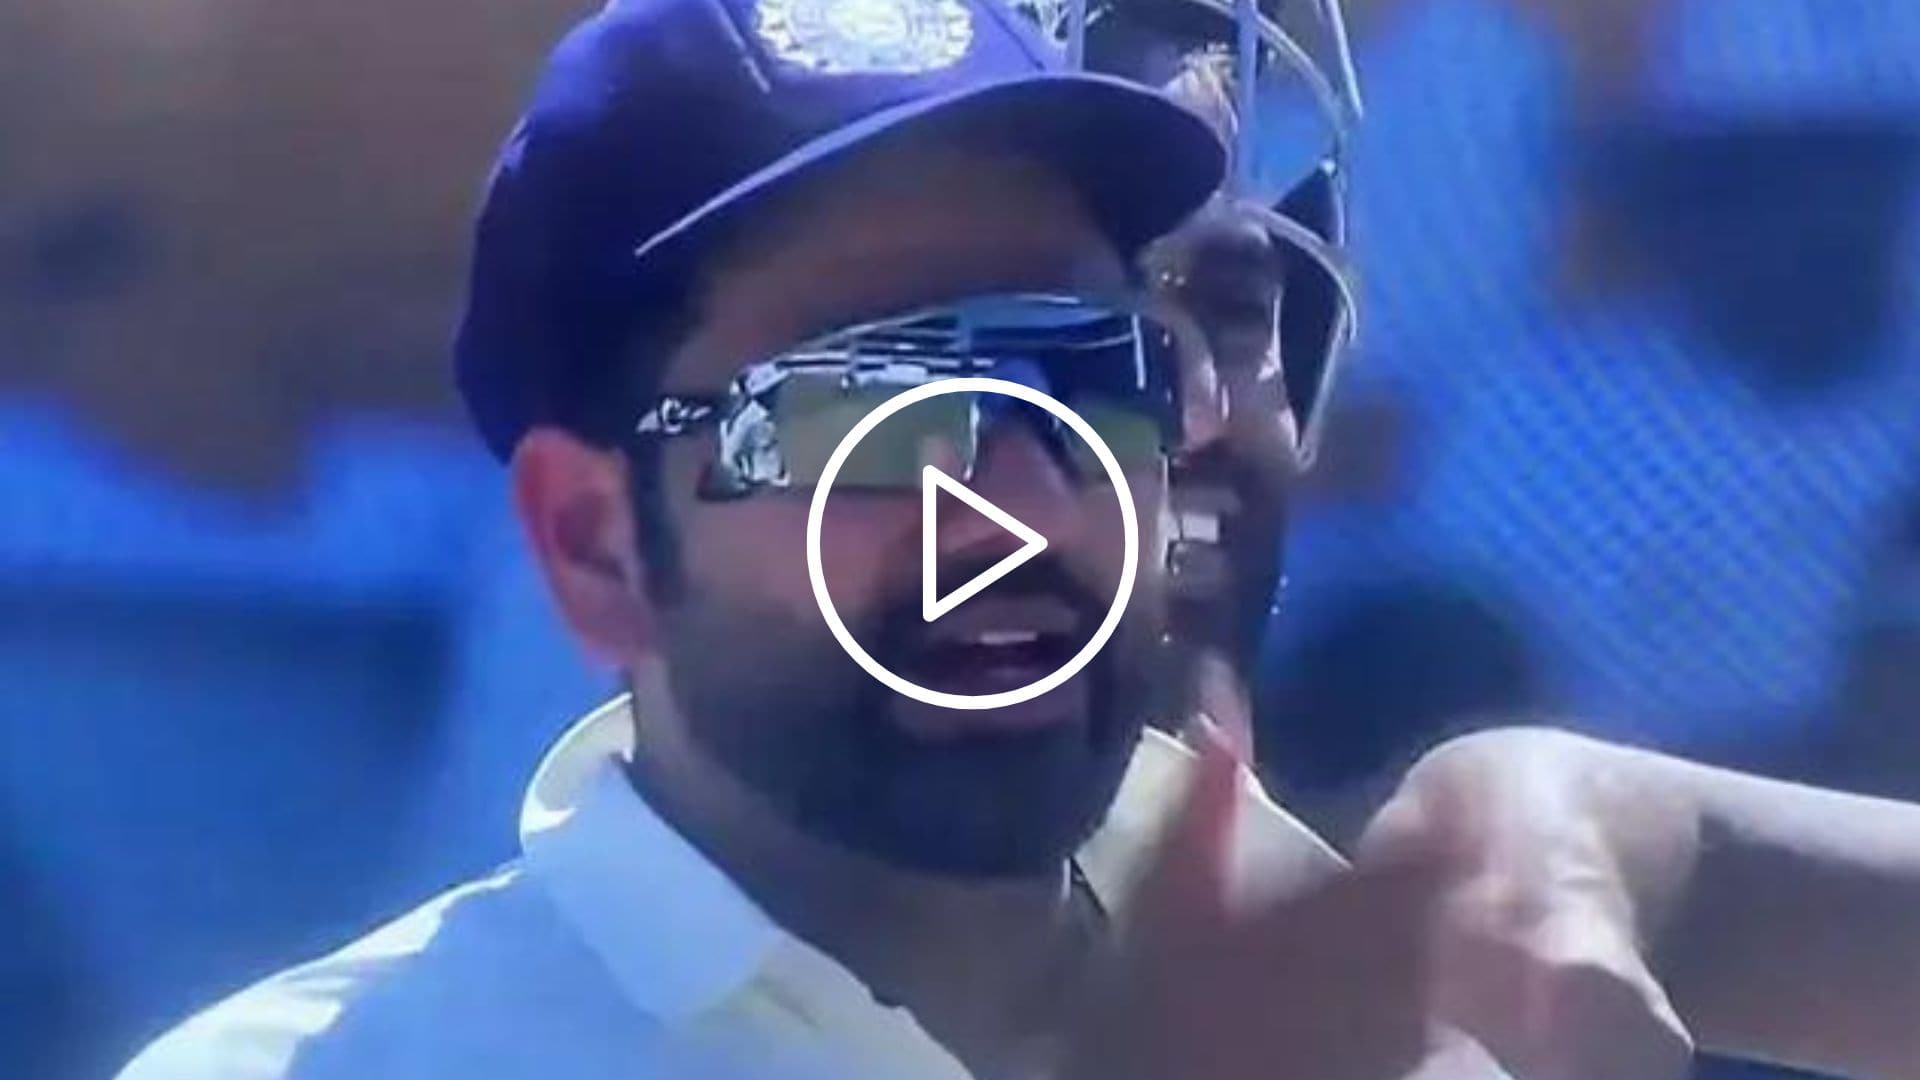 [Watch] Angry Rohit Sharma Abuses Teammates on Stump Mic, Video Goes Viral